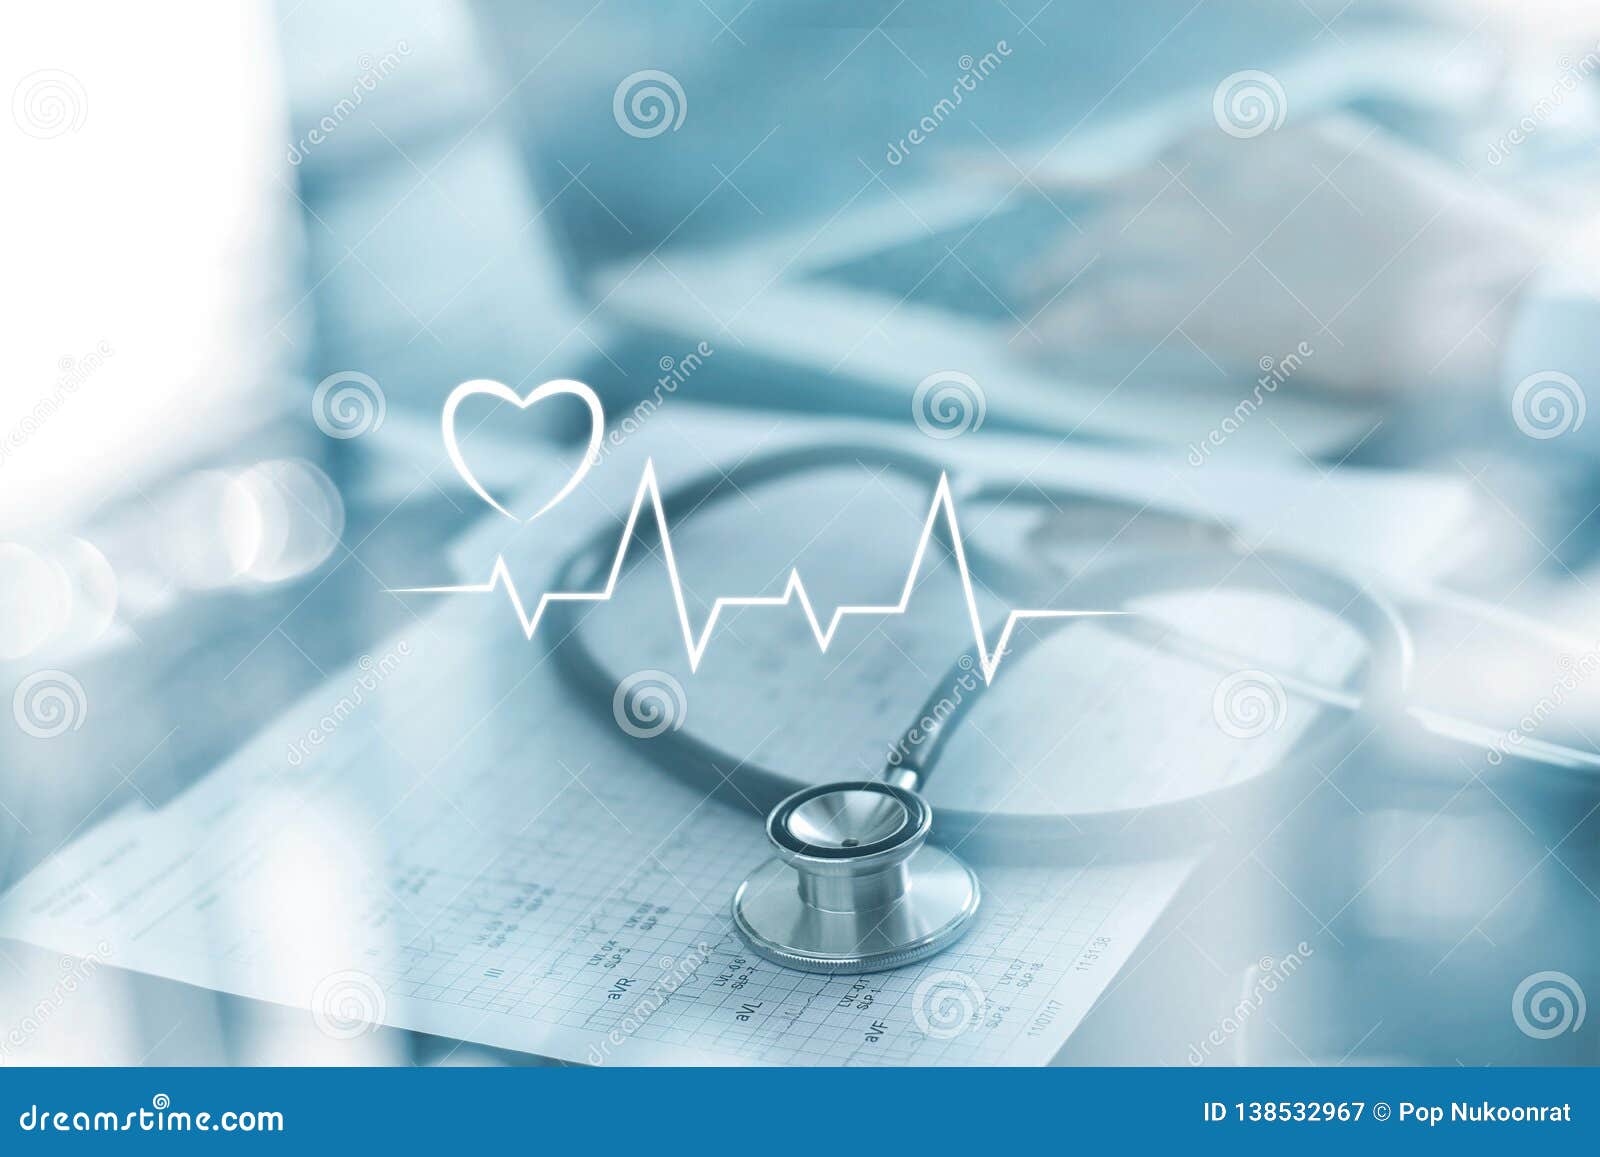 stethoscope with heart beat report and doctor analyzing checkup on laptop in health medical laboratory